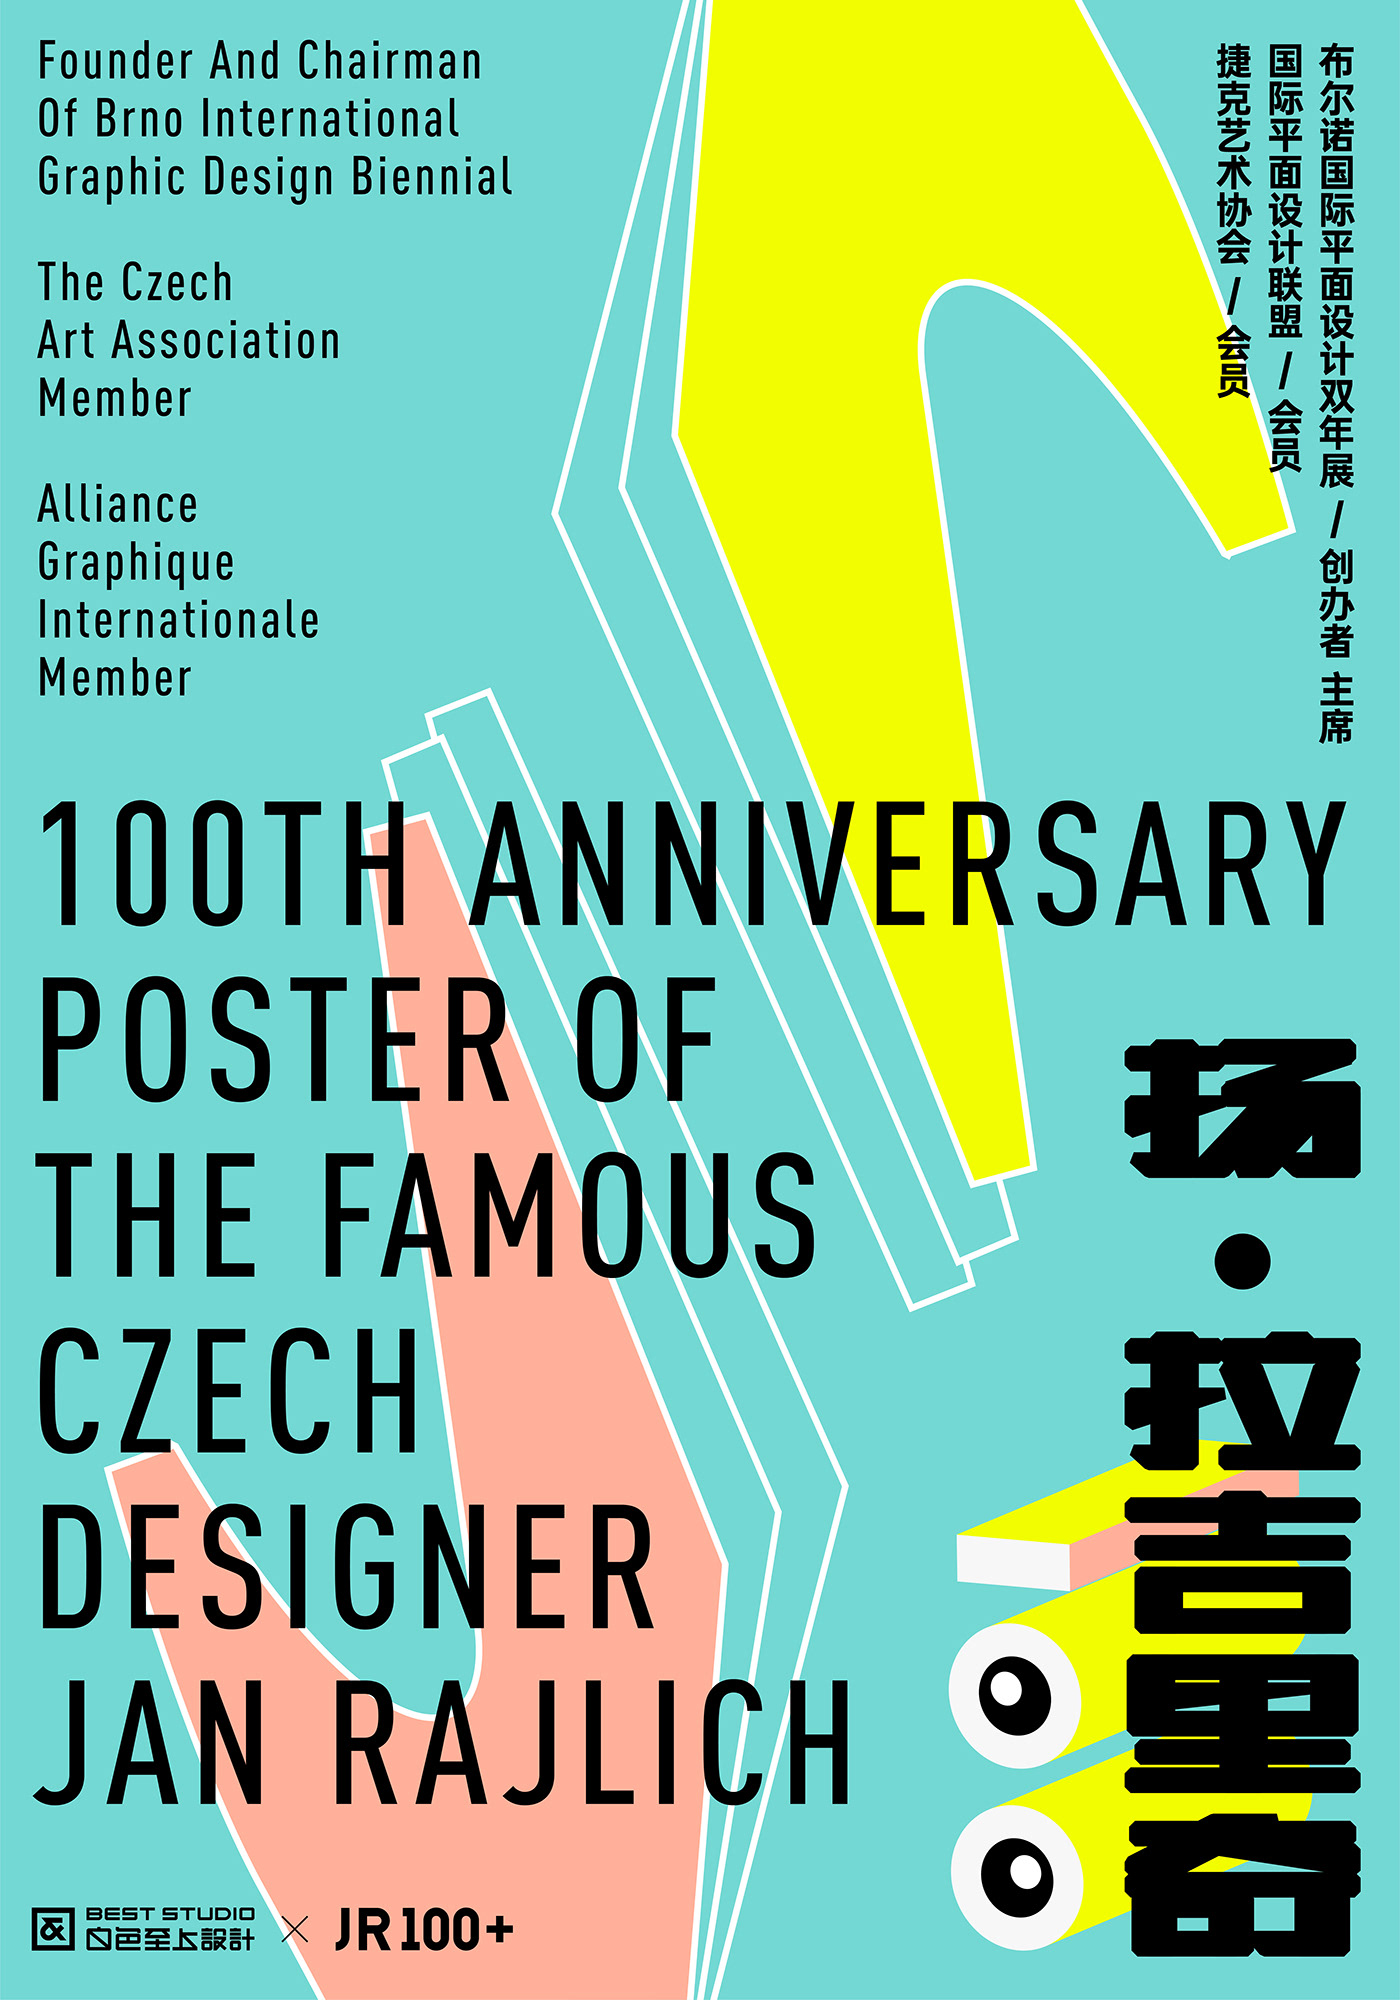 font design graphic jan rajlich 100 Layout poster collection Poster Design best studio visual art creative poster Typeface